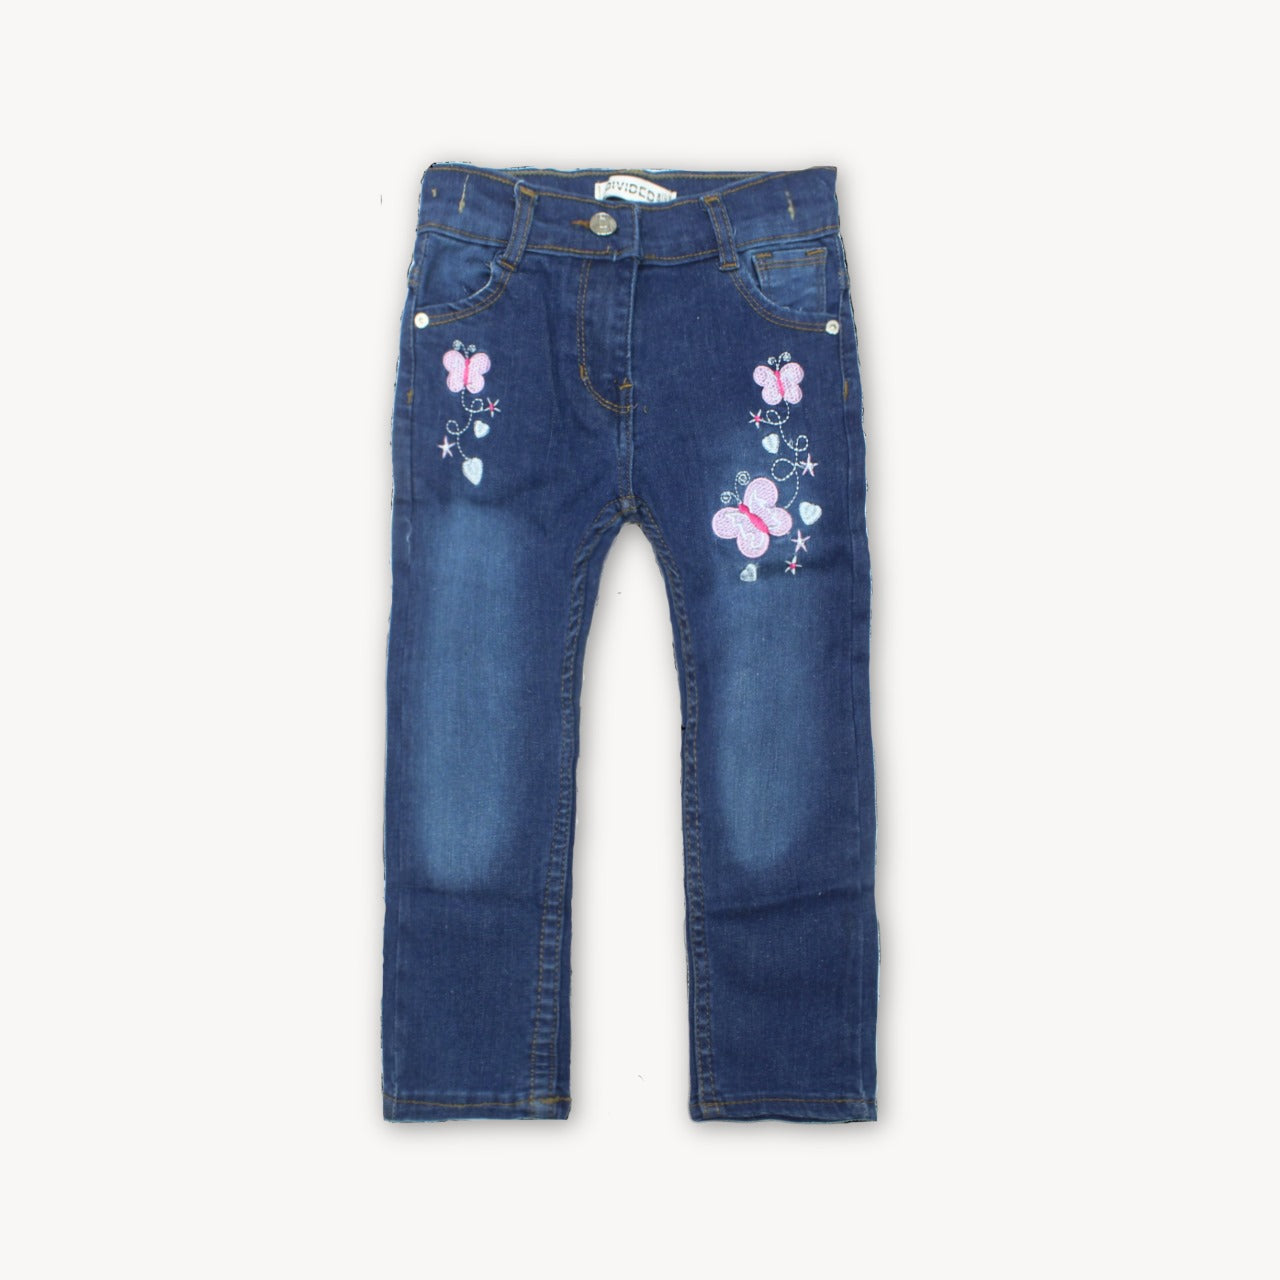 Aegean Blue Butteryfly Embroidered Denim Jeans